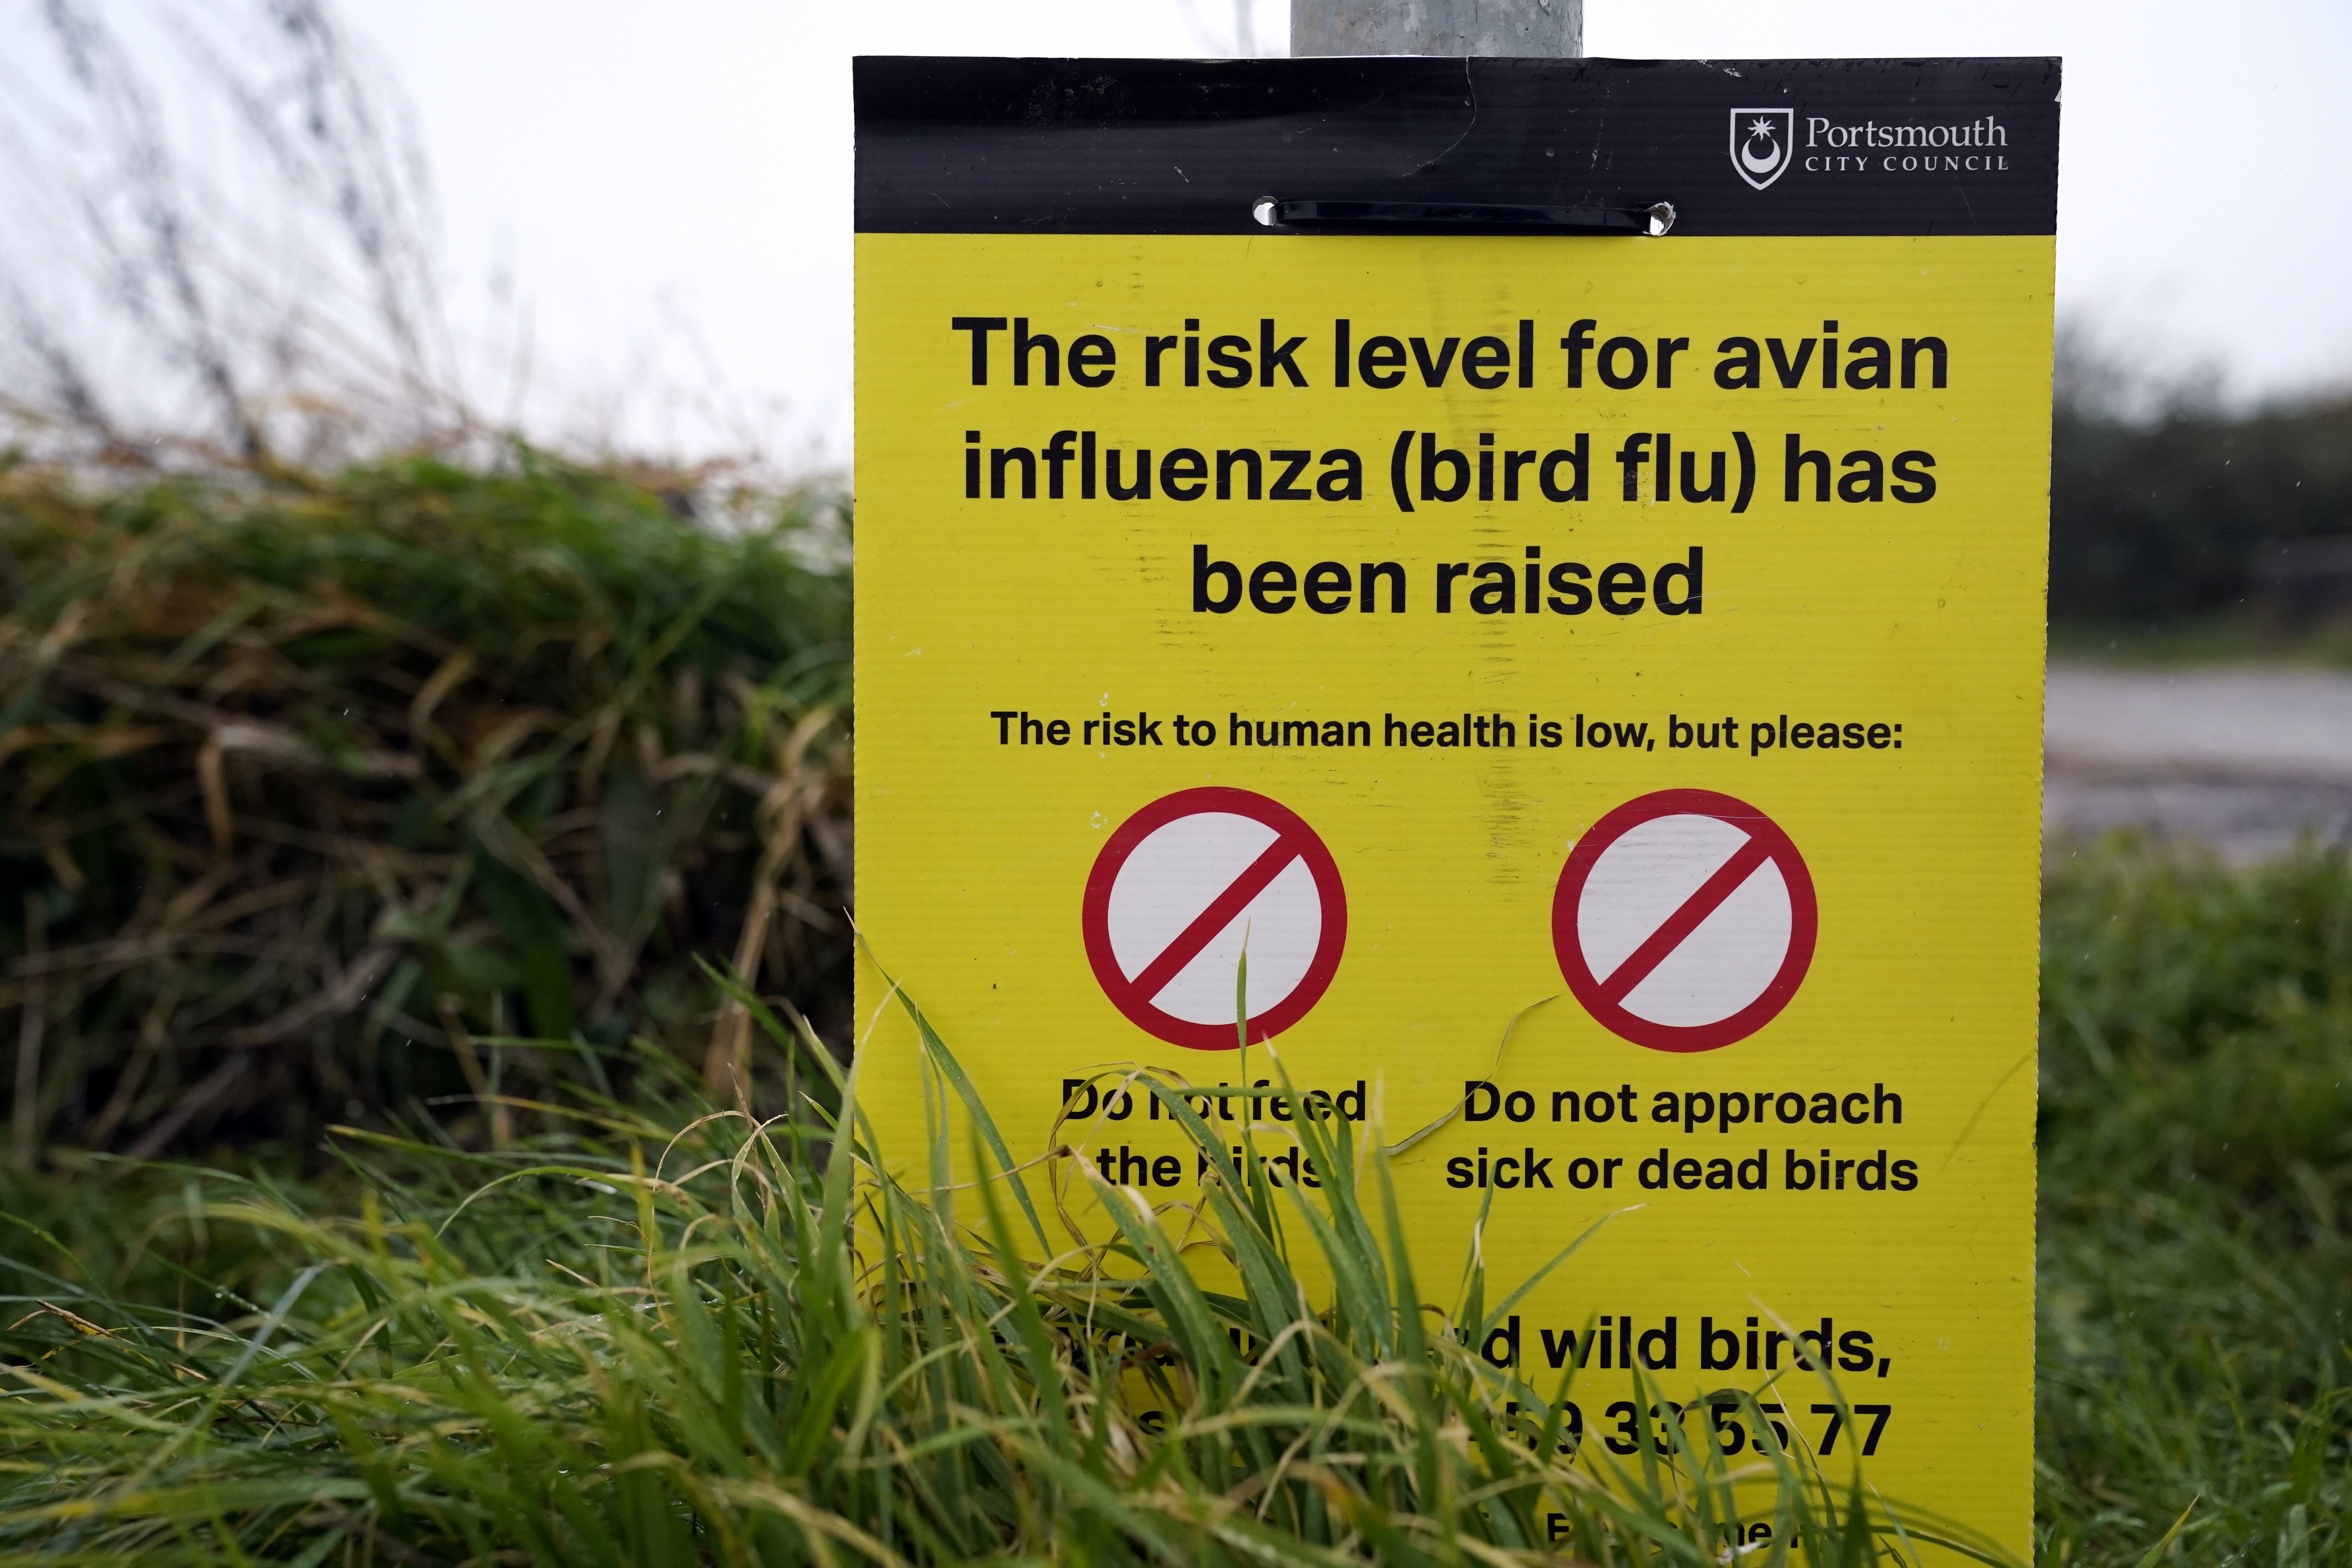 People have been warned to stay away from sick or dead wild birds and wash their hands if they feed wild birds (PA)